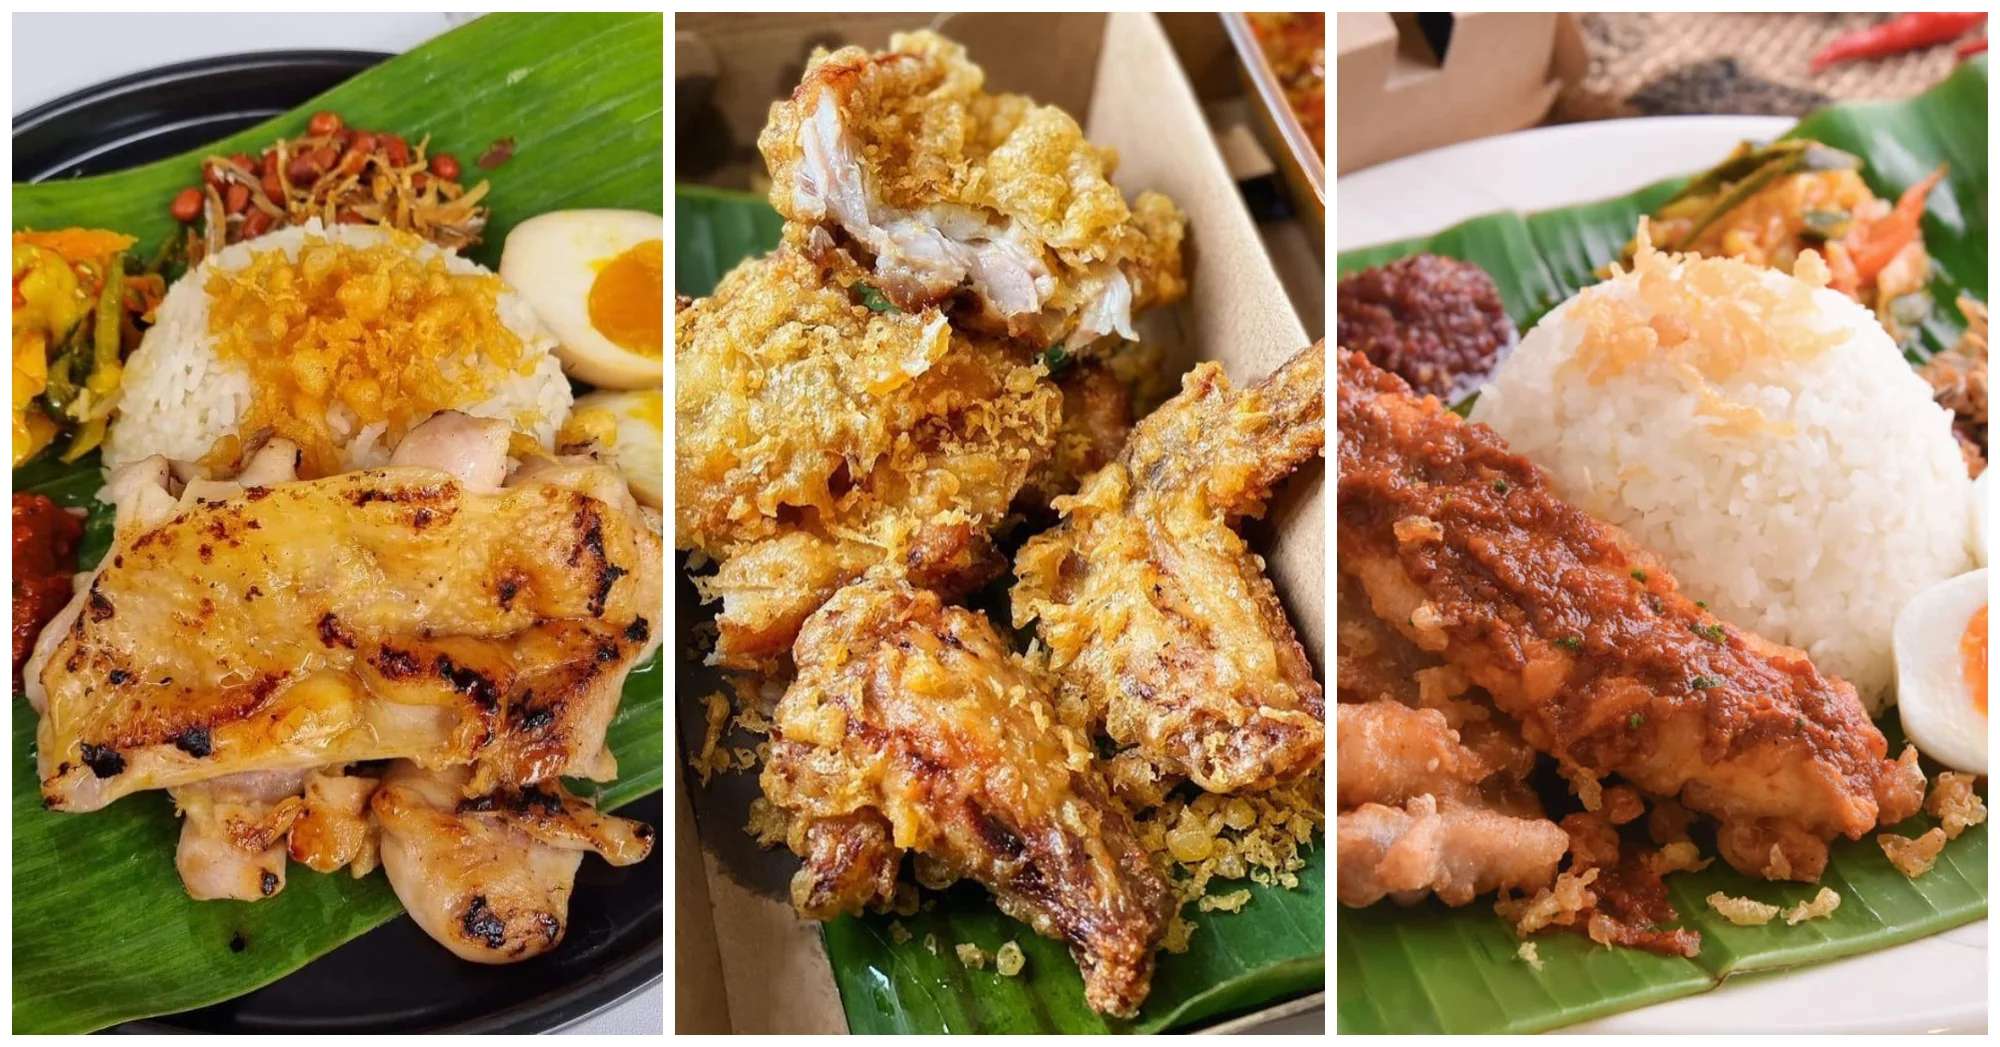 Check Out This Halal Taiwanese-Style Fusion Nasi Lemak In Bugis